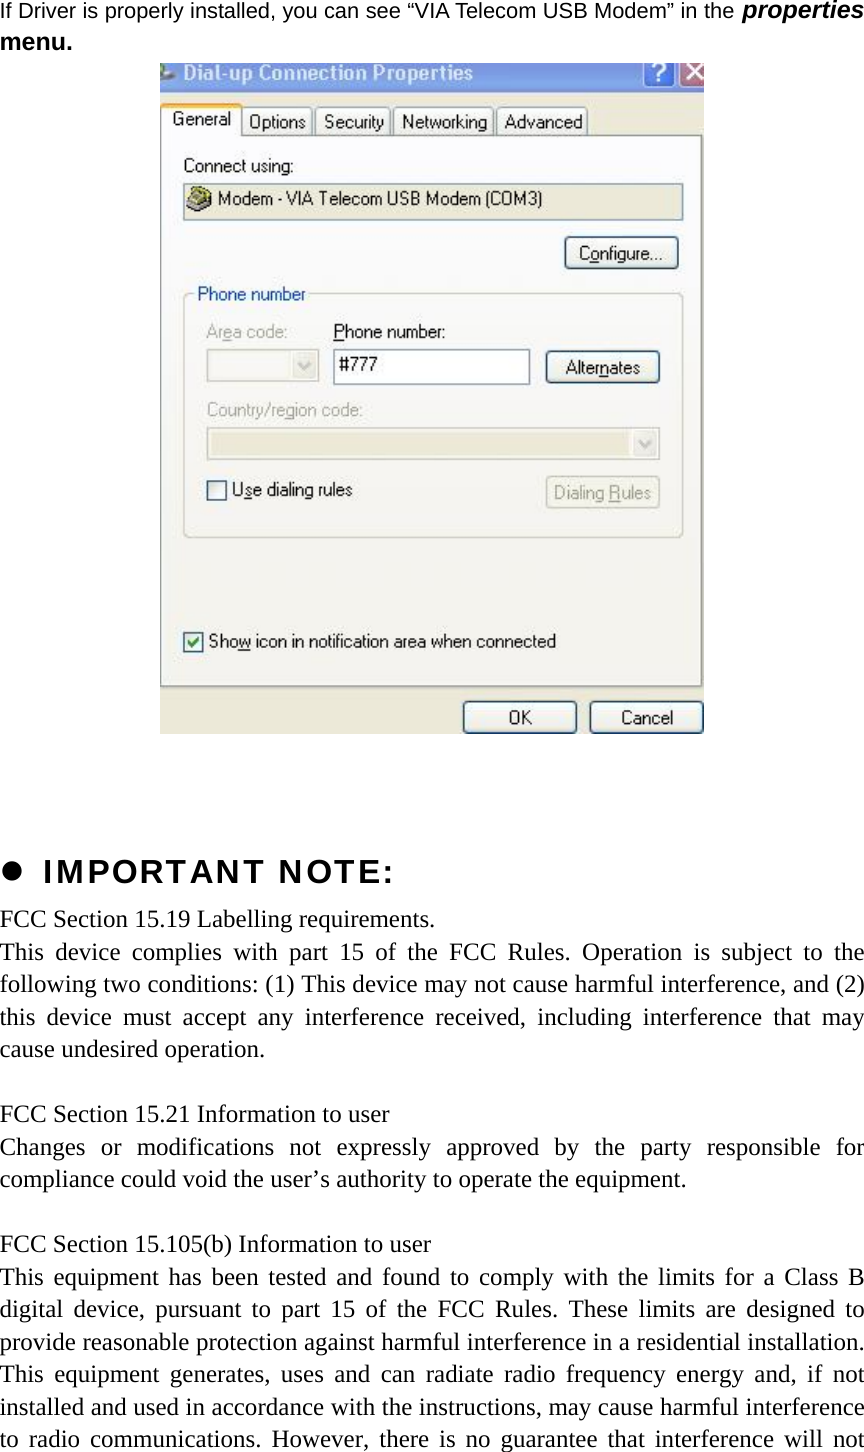 If Driver is properly installed, you can see “VIA Telecom USB Modem” in the properties menu.     z IMPORTANT NOTE: FCC Section 15.19 Labelling requirements. This device complies with part 15 of the FCC Rules. Operation is subject to the following two conditions: (1) This device may not cause harmful interference, and (2) this device must accept any interference received, including interference that may cause undesired operation.  FCC Section 15.21 Information to user Changes or modifications not expressly approved by the party responsible for compliance could void the user’s authority to operate the equipment.  FCC Section 15.105(b) Information to user This equipment has been tested and found to comply with the limits for a Class B digital device, pursuant to part 15 of the FCC Rules. These limits are designed to provide reasonable protection against harmful interference in a residential installation. This equipment generates, uses and can radiate radio frequency energy and, if not installed and used in accordance with the instructions, may cause harmful interference to radio communications. However, there is no guarantee that interference will not 